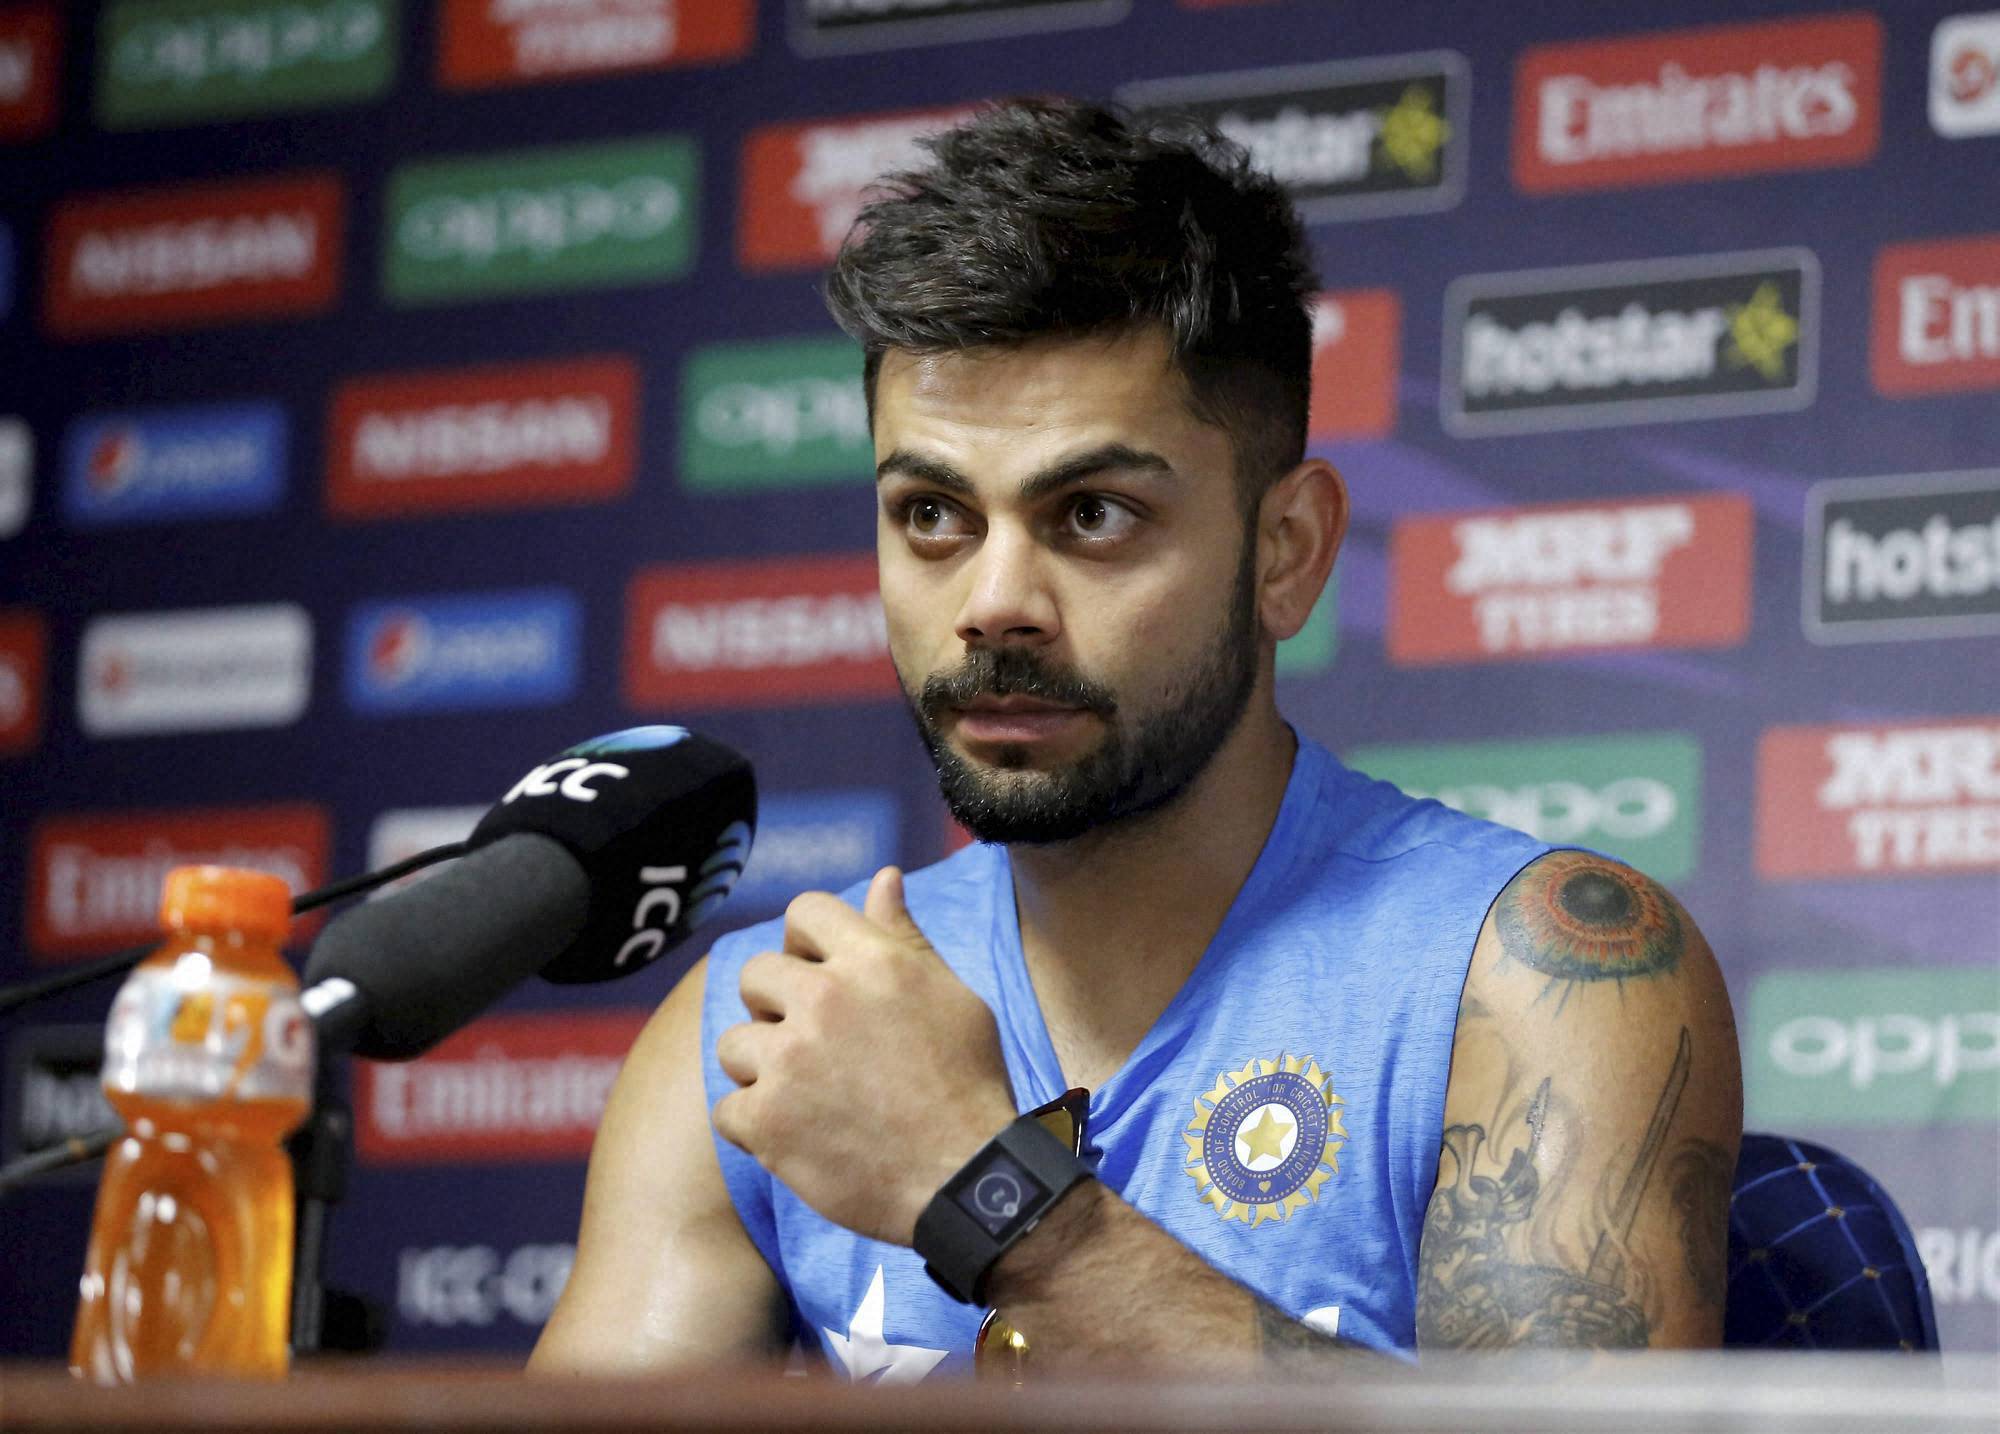 Kohli Talks About What Might Be The Key To Victory Ahead Of Battle Against Australia